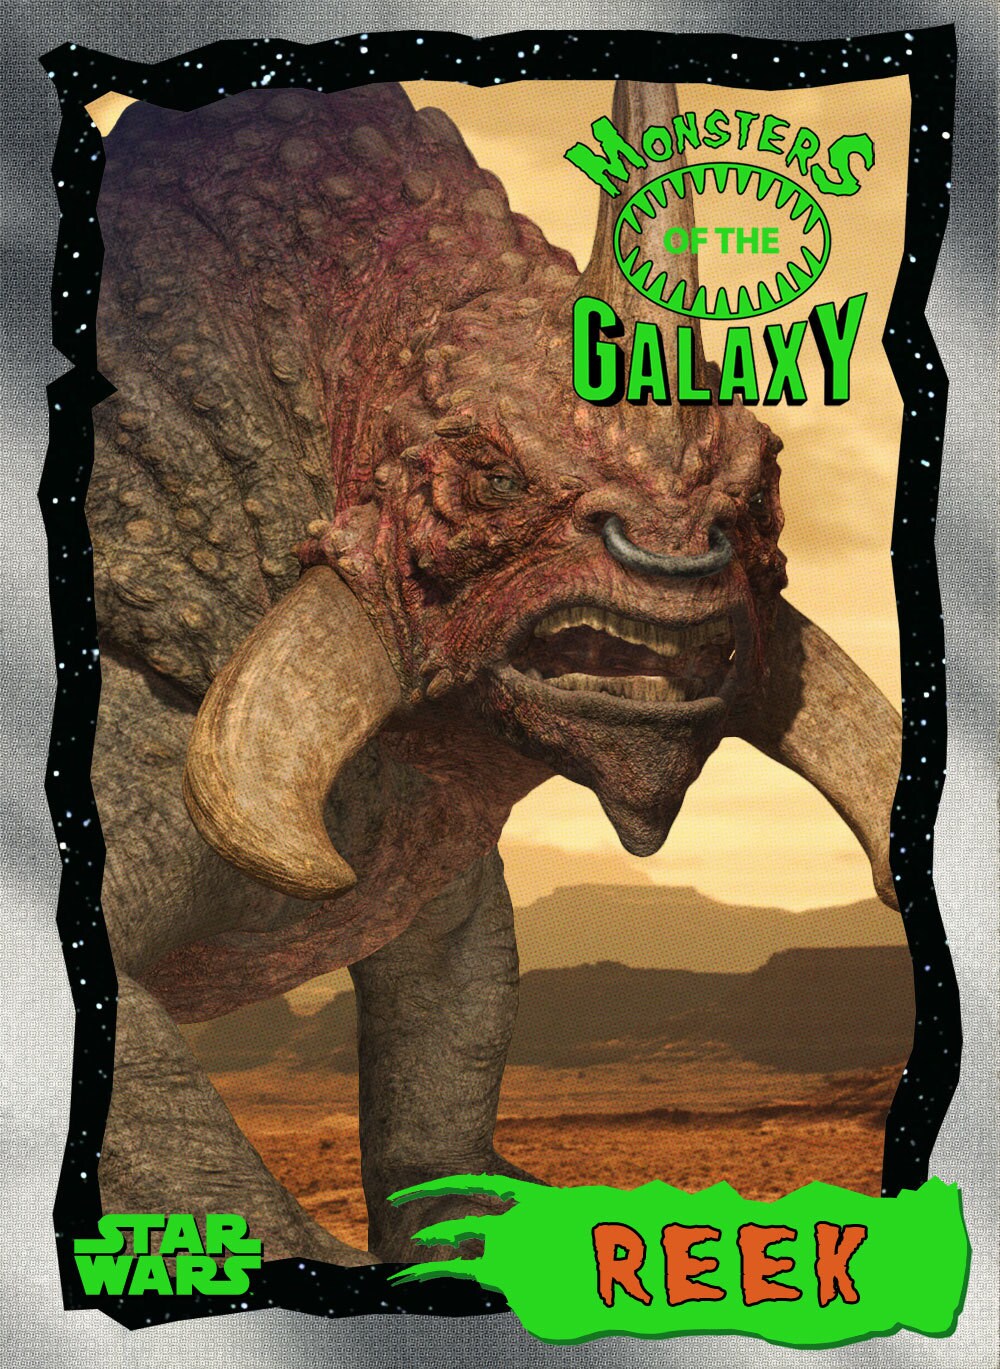 Monsters of the Galaxy